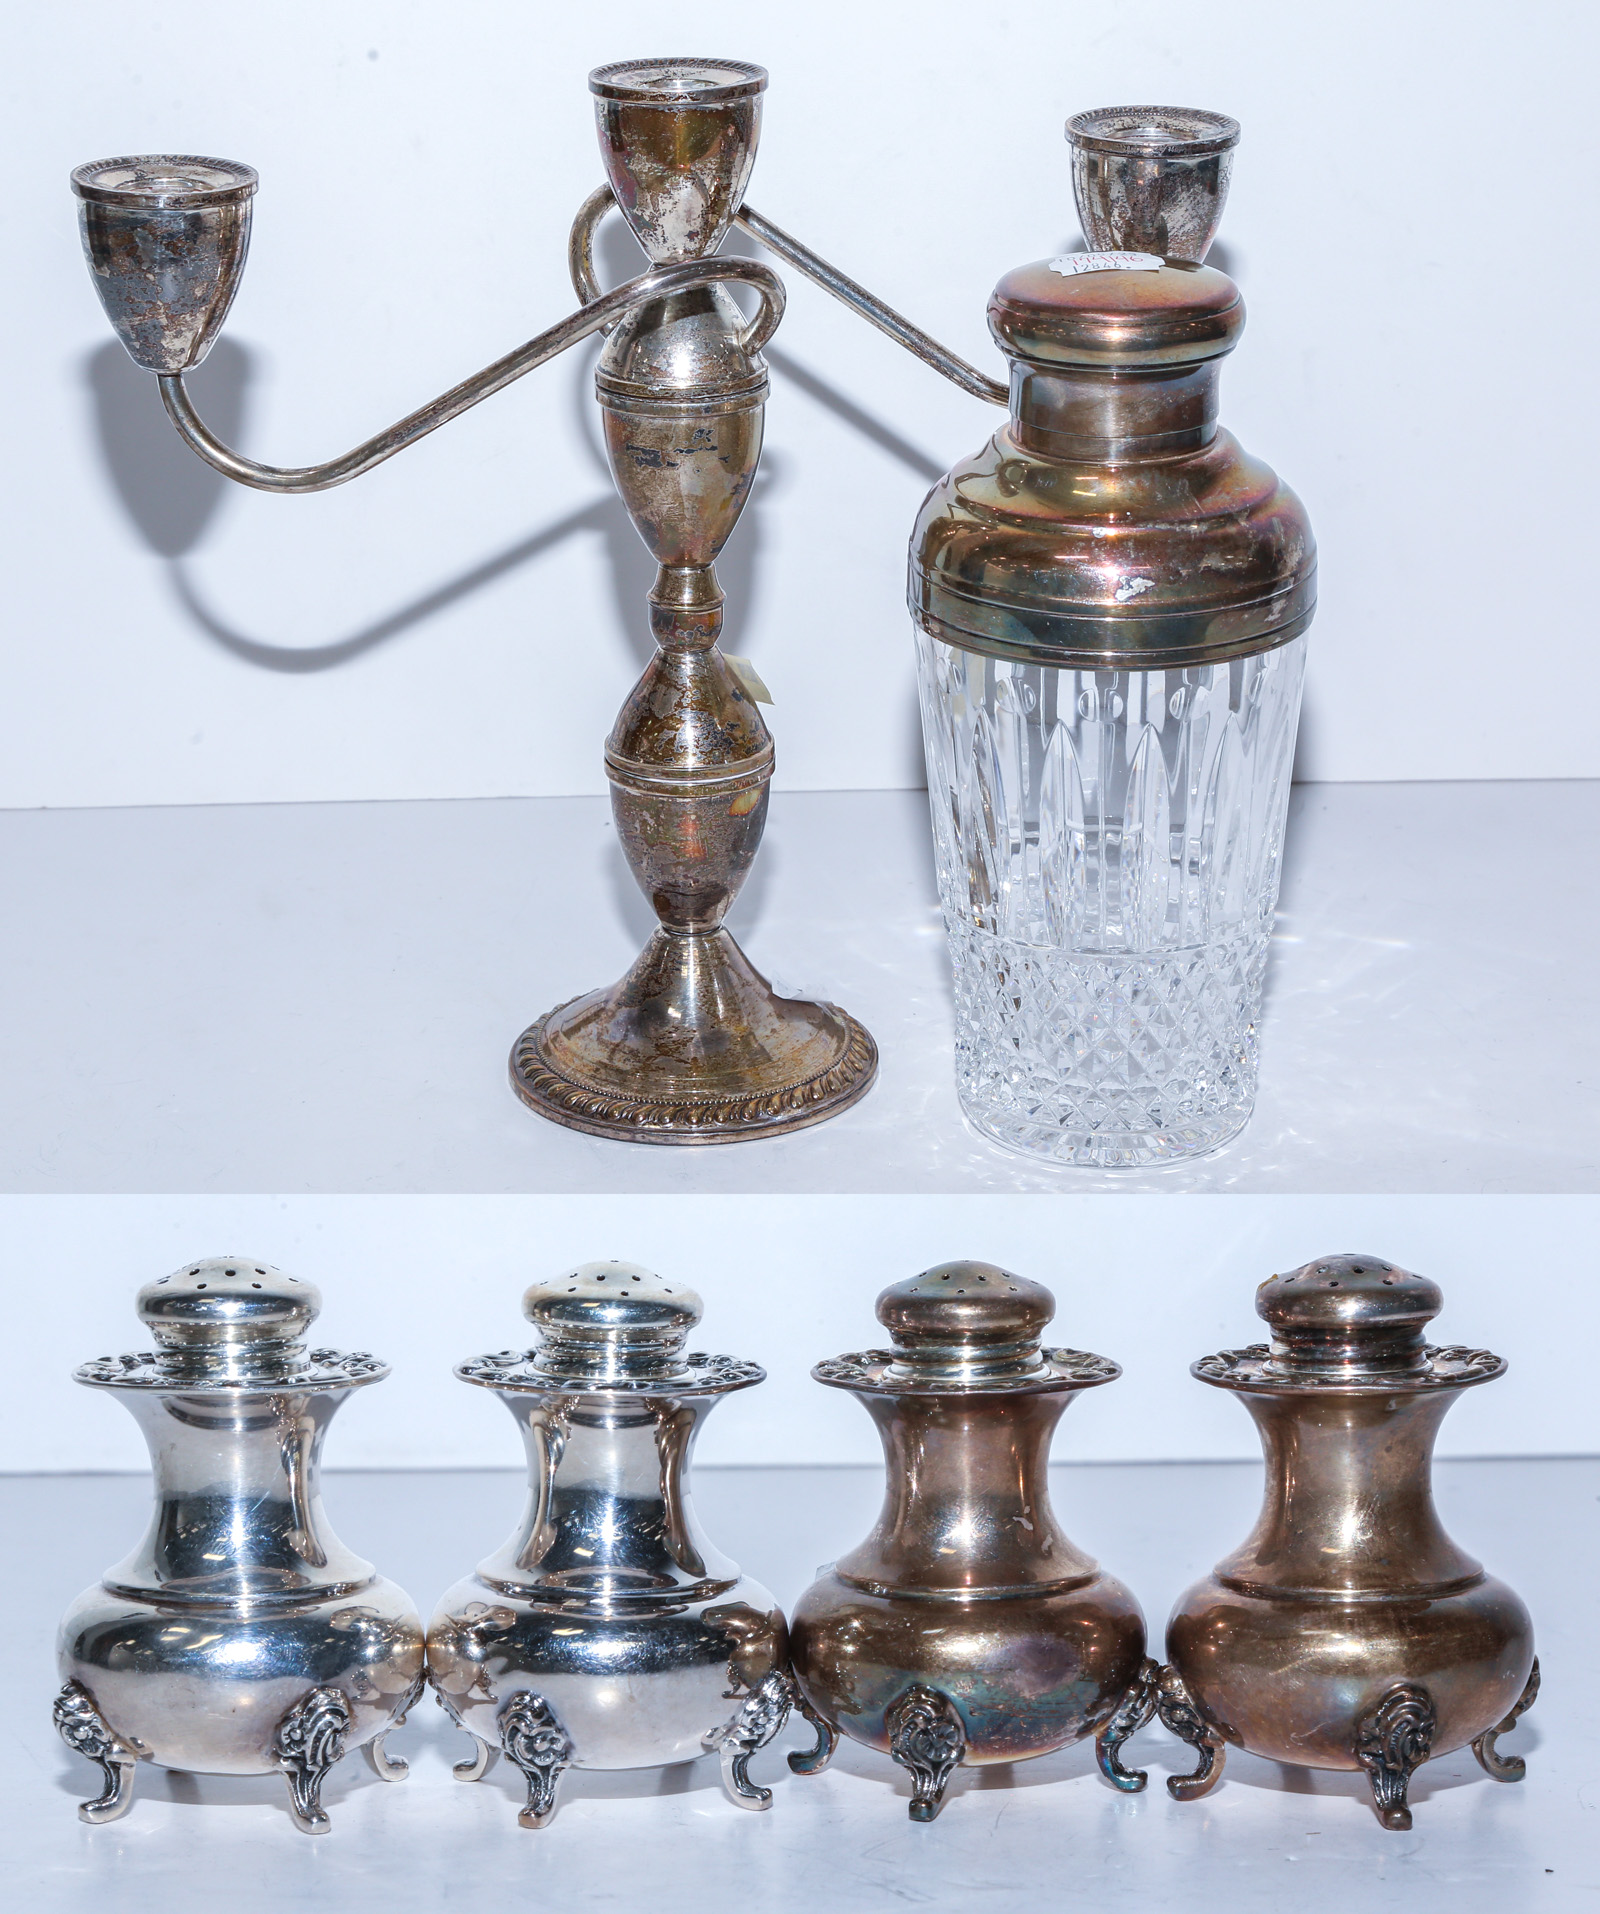 GROUP OF STERLING TABLE ITEMS including